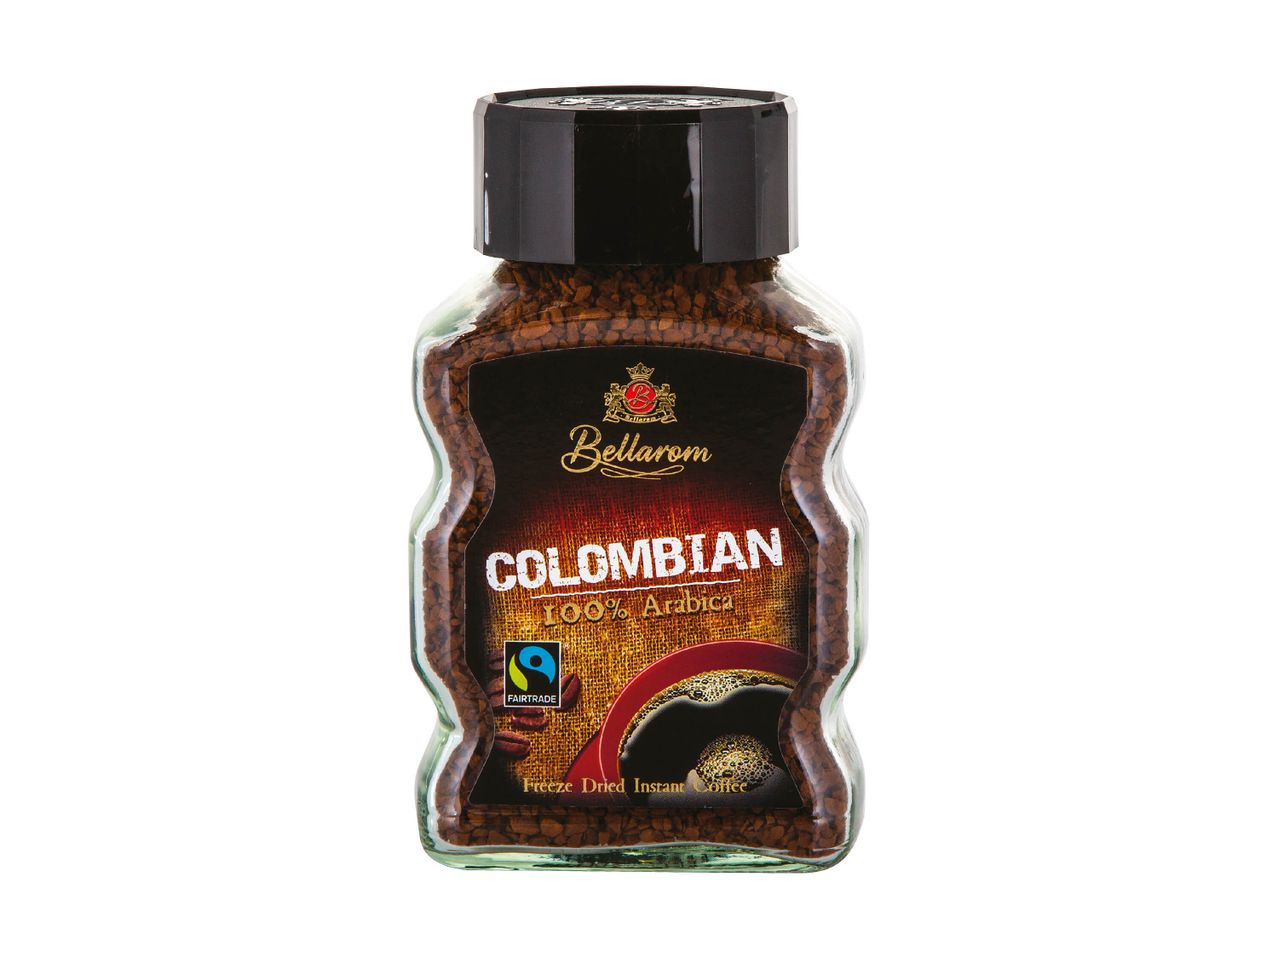 Go to full screen view: Bellarom FAIRTRADE FREEZE DRIED INSTANT COFFEE - Image 1